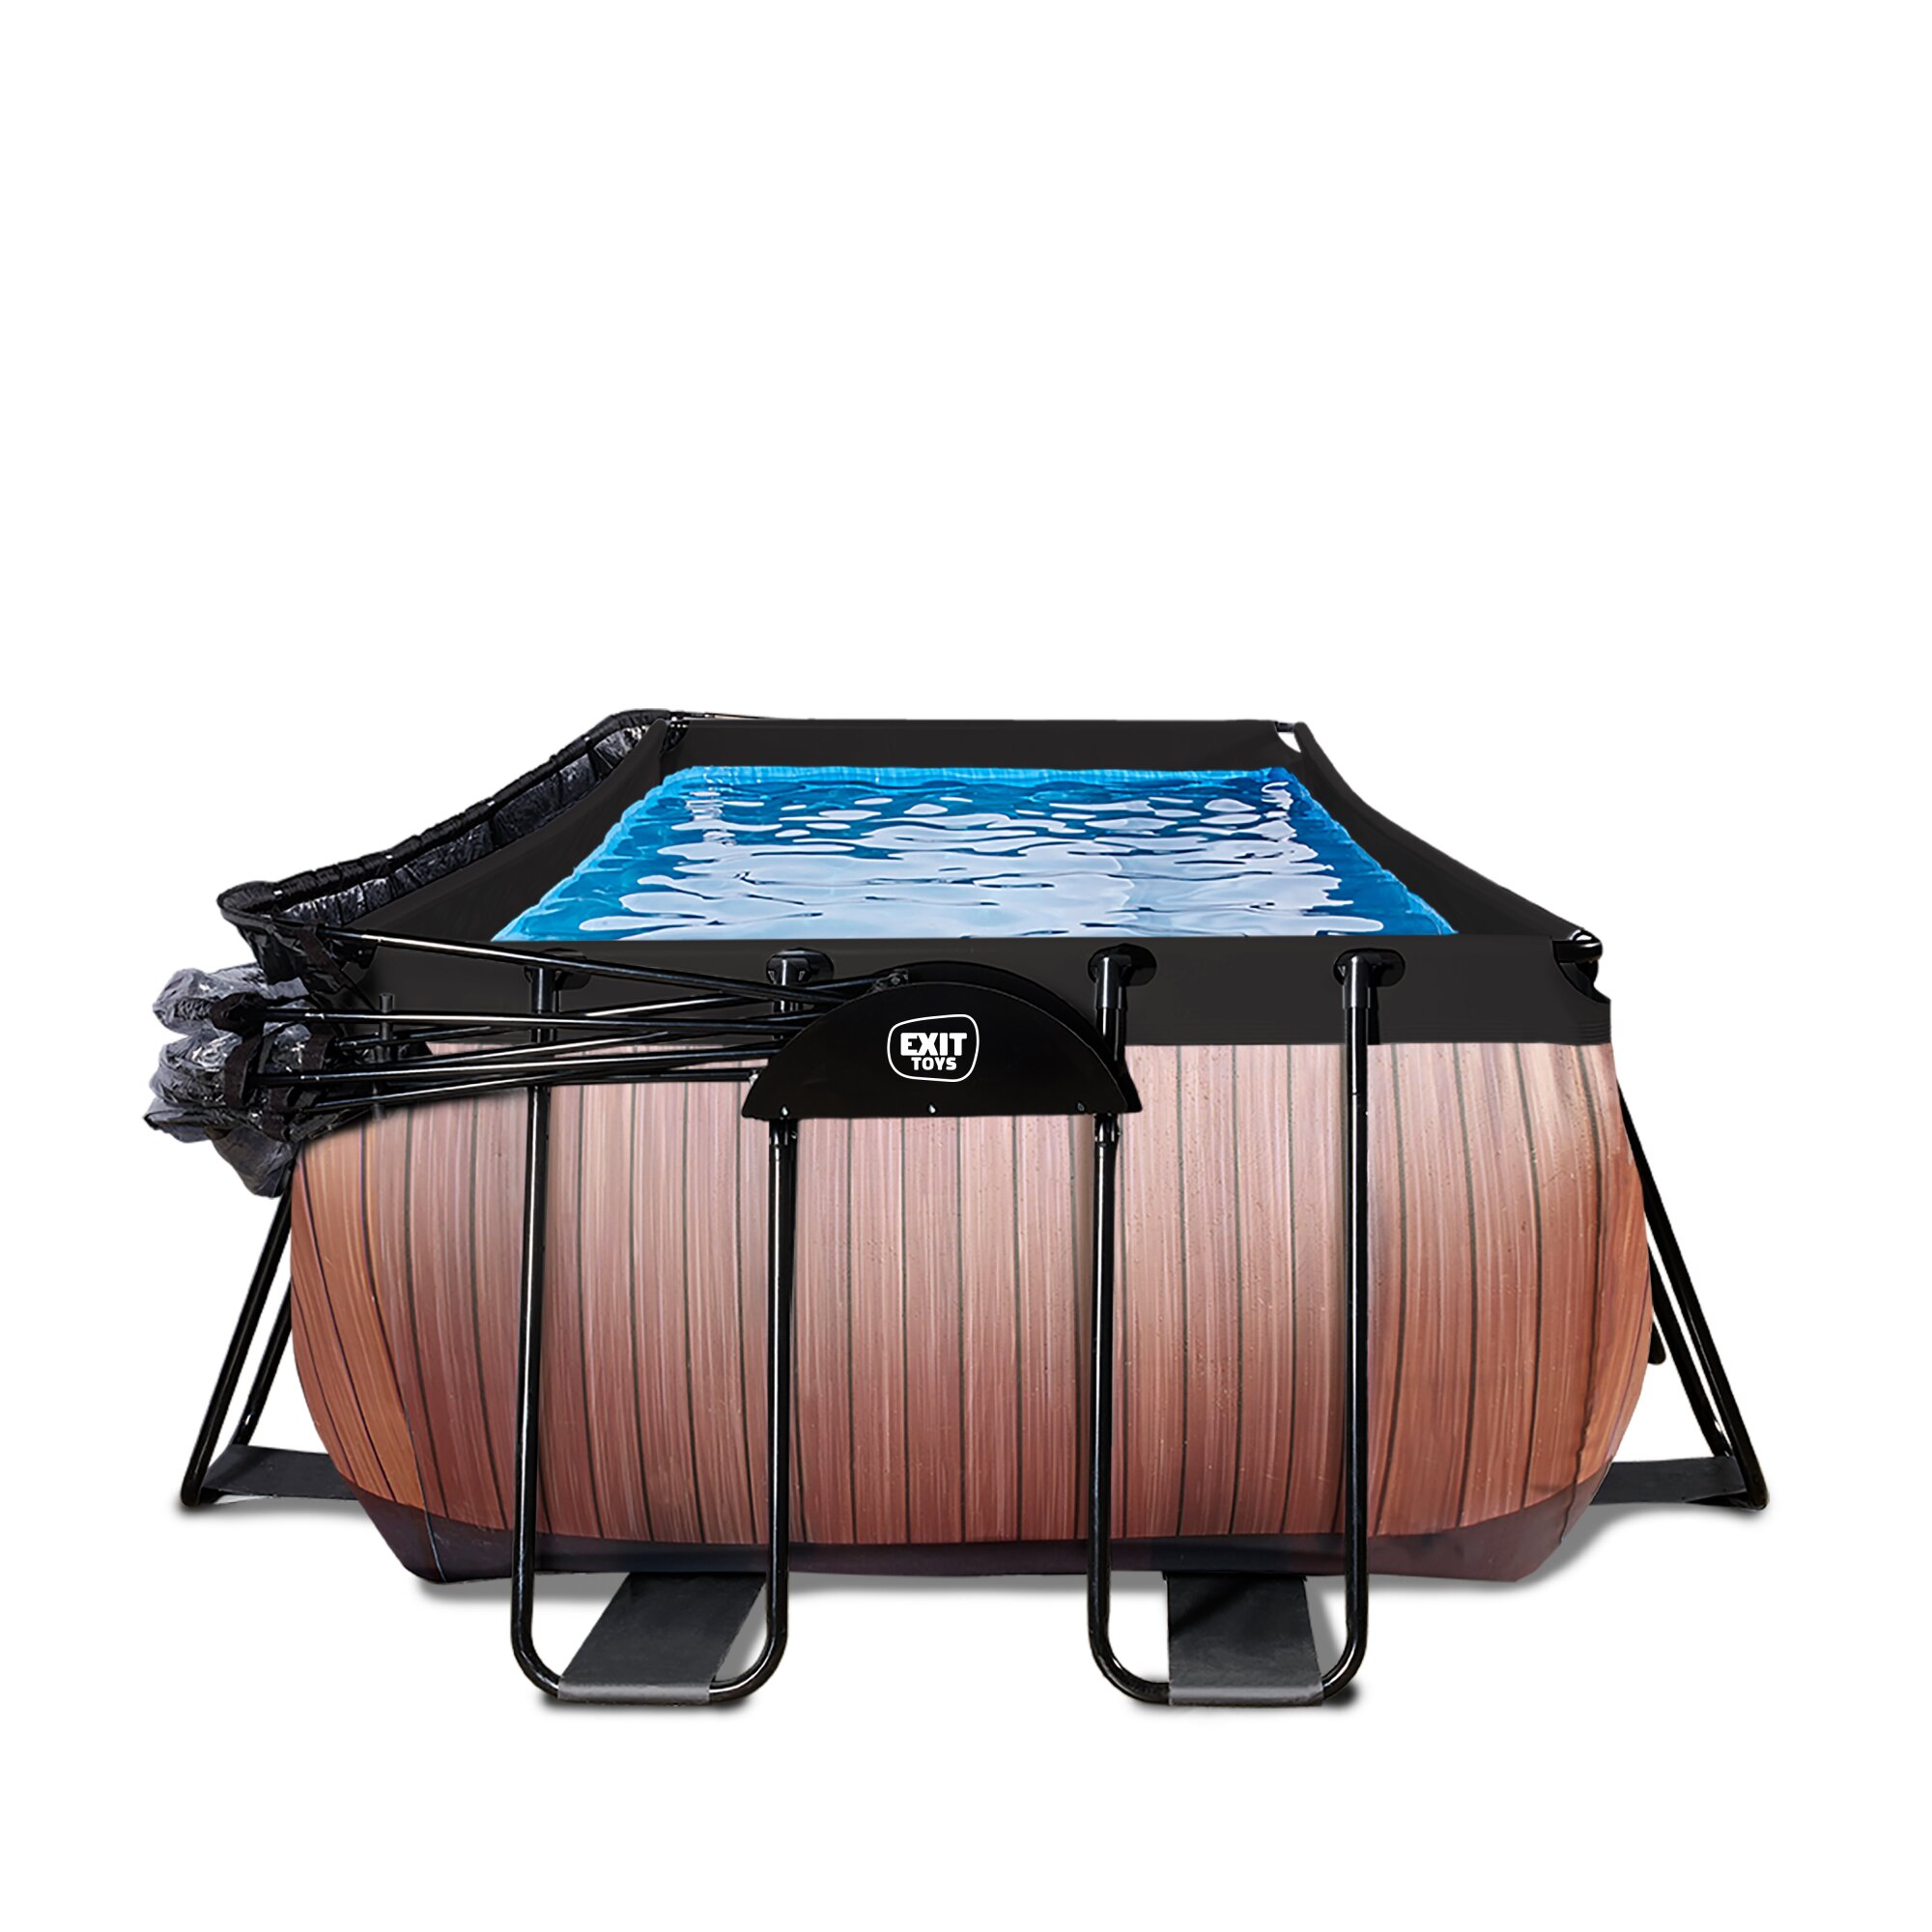 EXIT Wood pool 540x250x122cm with sand filter pump and dome and heat pump - brown